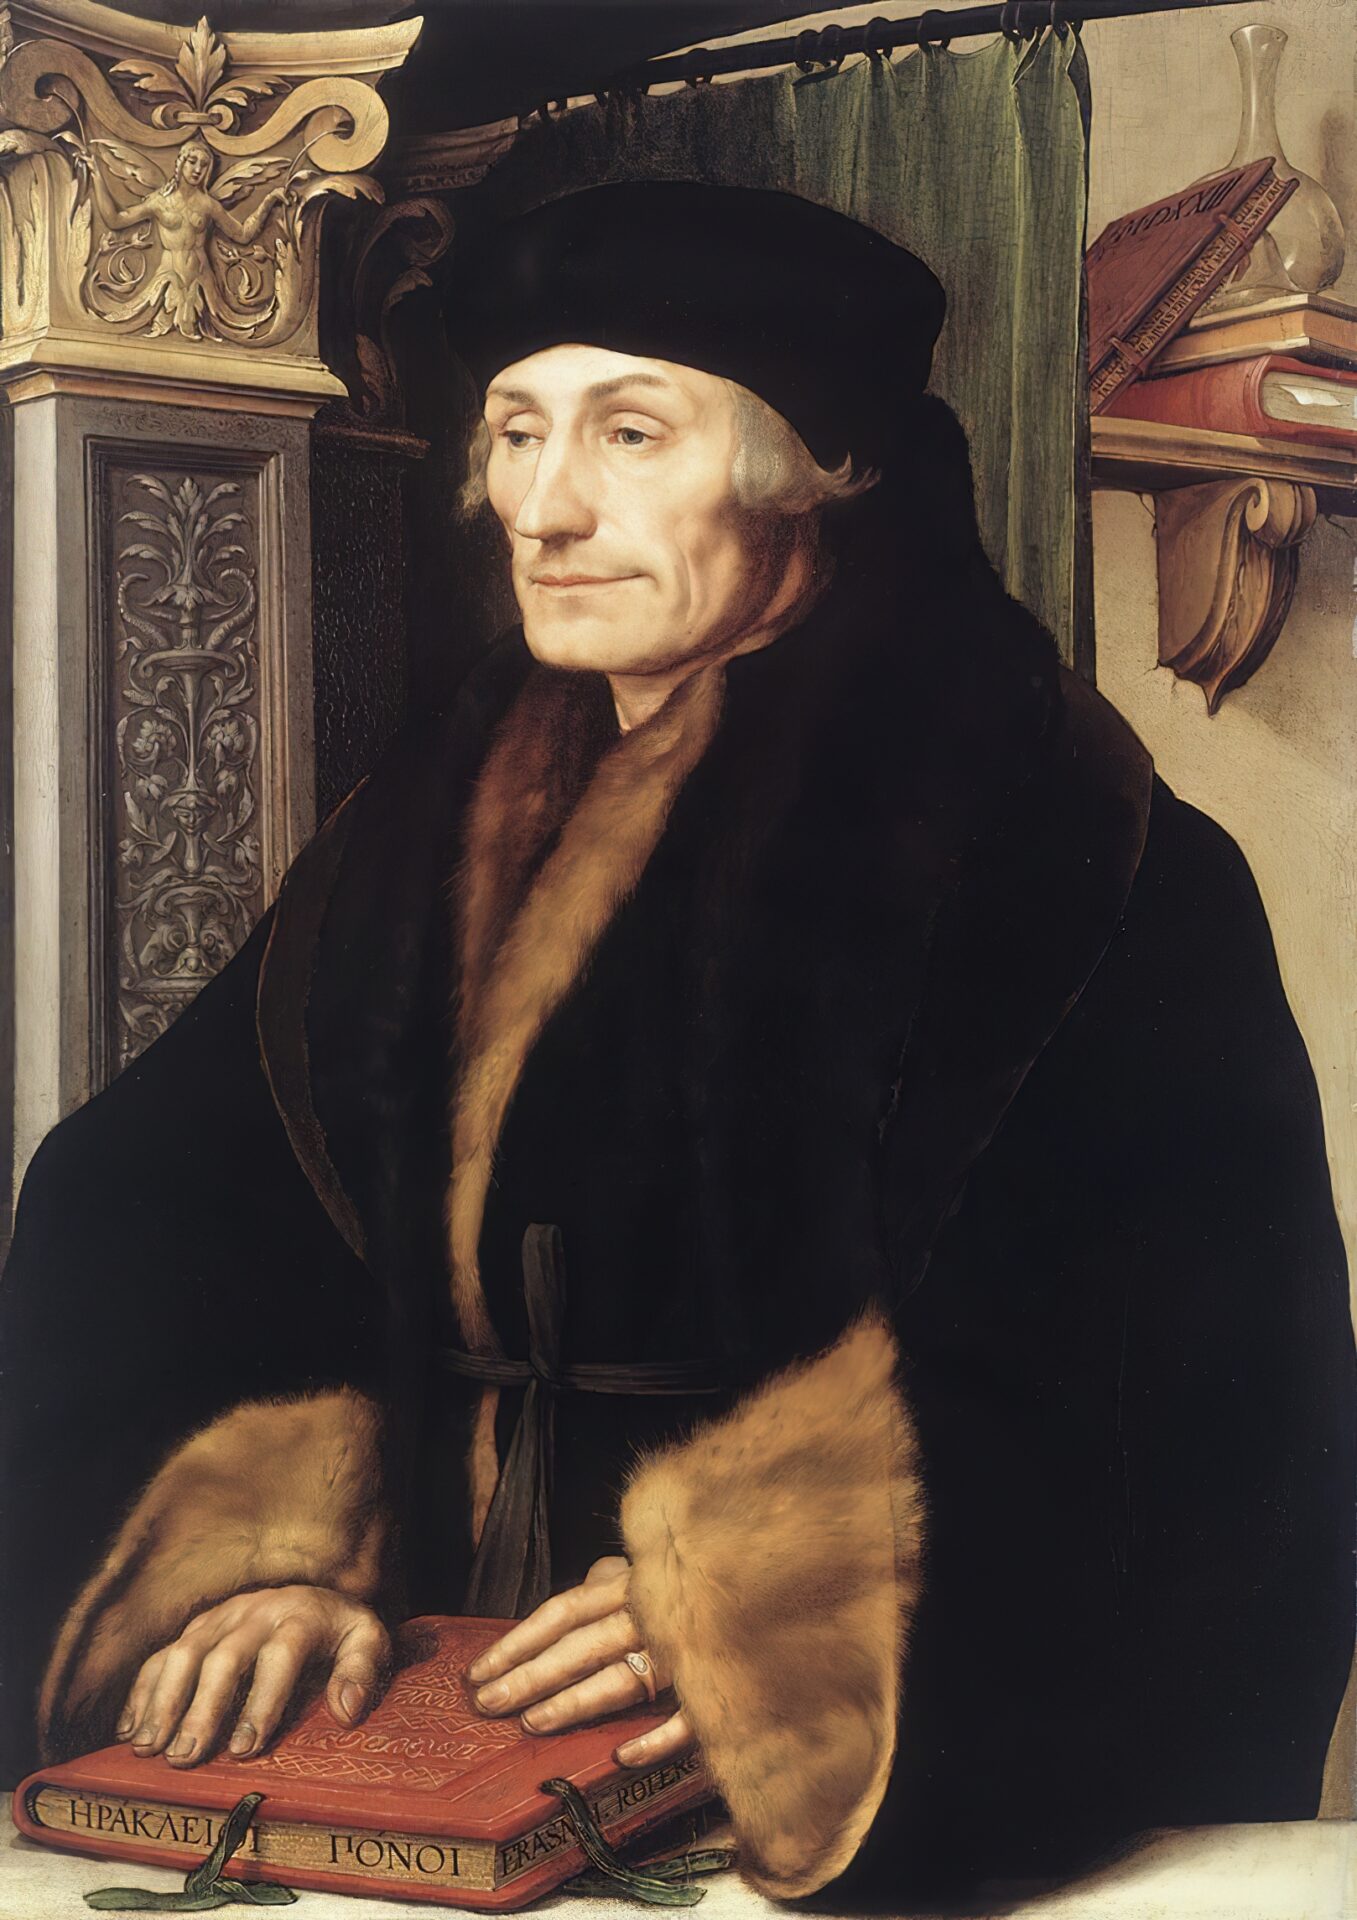 HOLBEIN, Hans the Younger
(b. 1497, Augsburg, d. 1543, London)

Portrait of Erasmus of Rotterdam
1523
Wood, 76 x 51 cm
National Gallery, London

Of Holbein's portraits of Erasmus, this is the most ostentatious, and not just because it is much larger. The background of the interior is furnished with a splendidly decorated pilaster and a shelf with books and a glass carafe, all of which help to ennoble the sitter. On the edge of the book reclining on the shelf is a Latin couplet composed by Erasmus, which asserts that Holbein would sooner have a slanderer than an imitator. That seems to mean that his outstanding art could scarcely be imitated and therefore criticism from the envious is more likely than imitation.






--- Keywords: --------------

Author: HOLBEIN, Hans the Younger
Title: Portrait of Erasmus of Rotterdam
Time-line: 1501-1550
School: German
Form: painting
Type: portrait